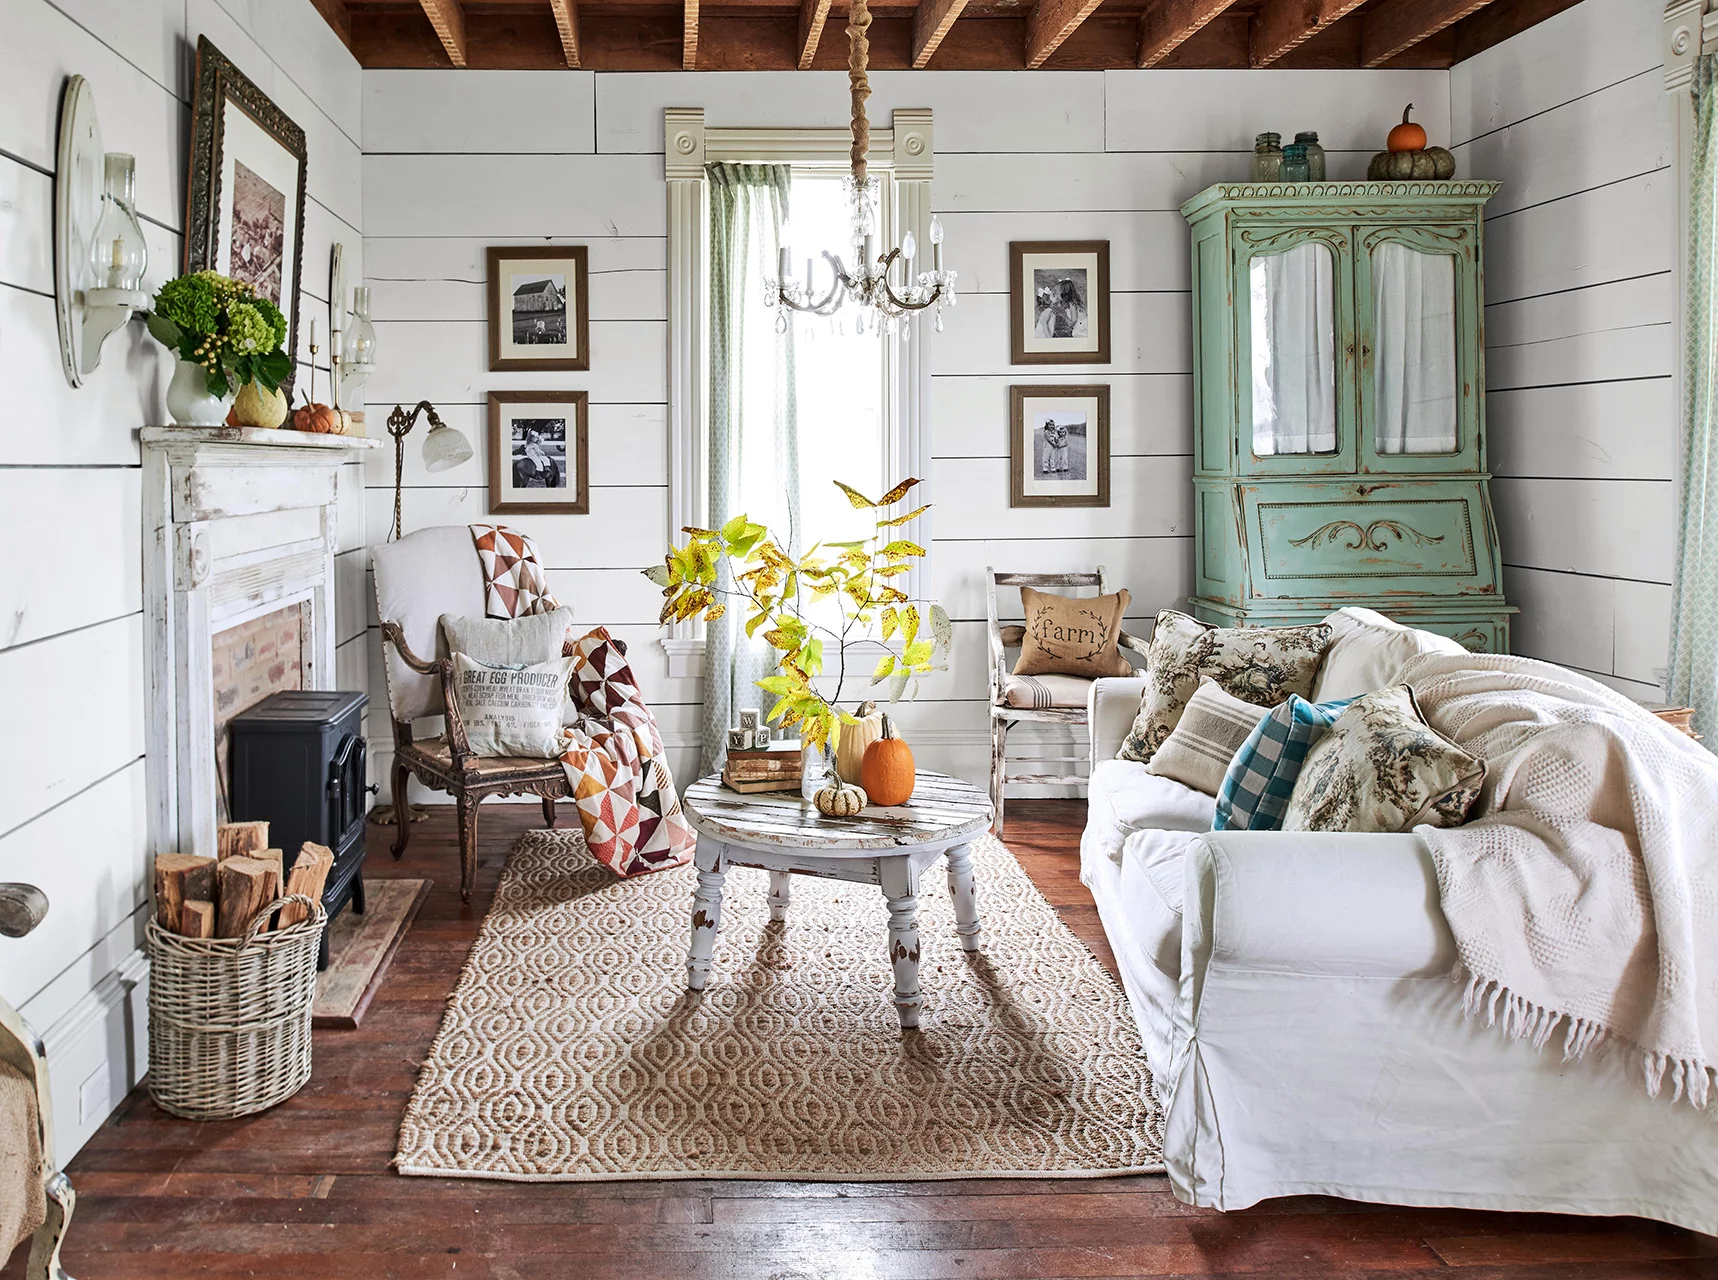 A rustic white living room - create a rural retreat in your home